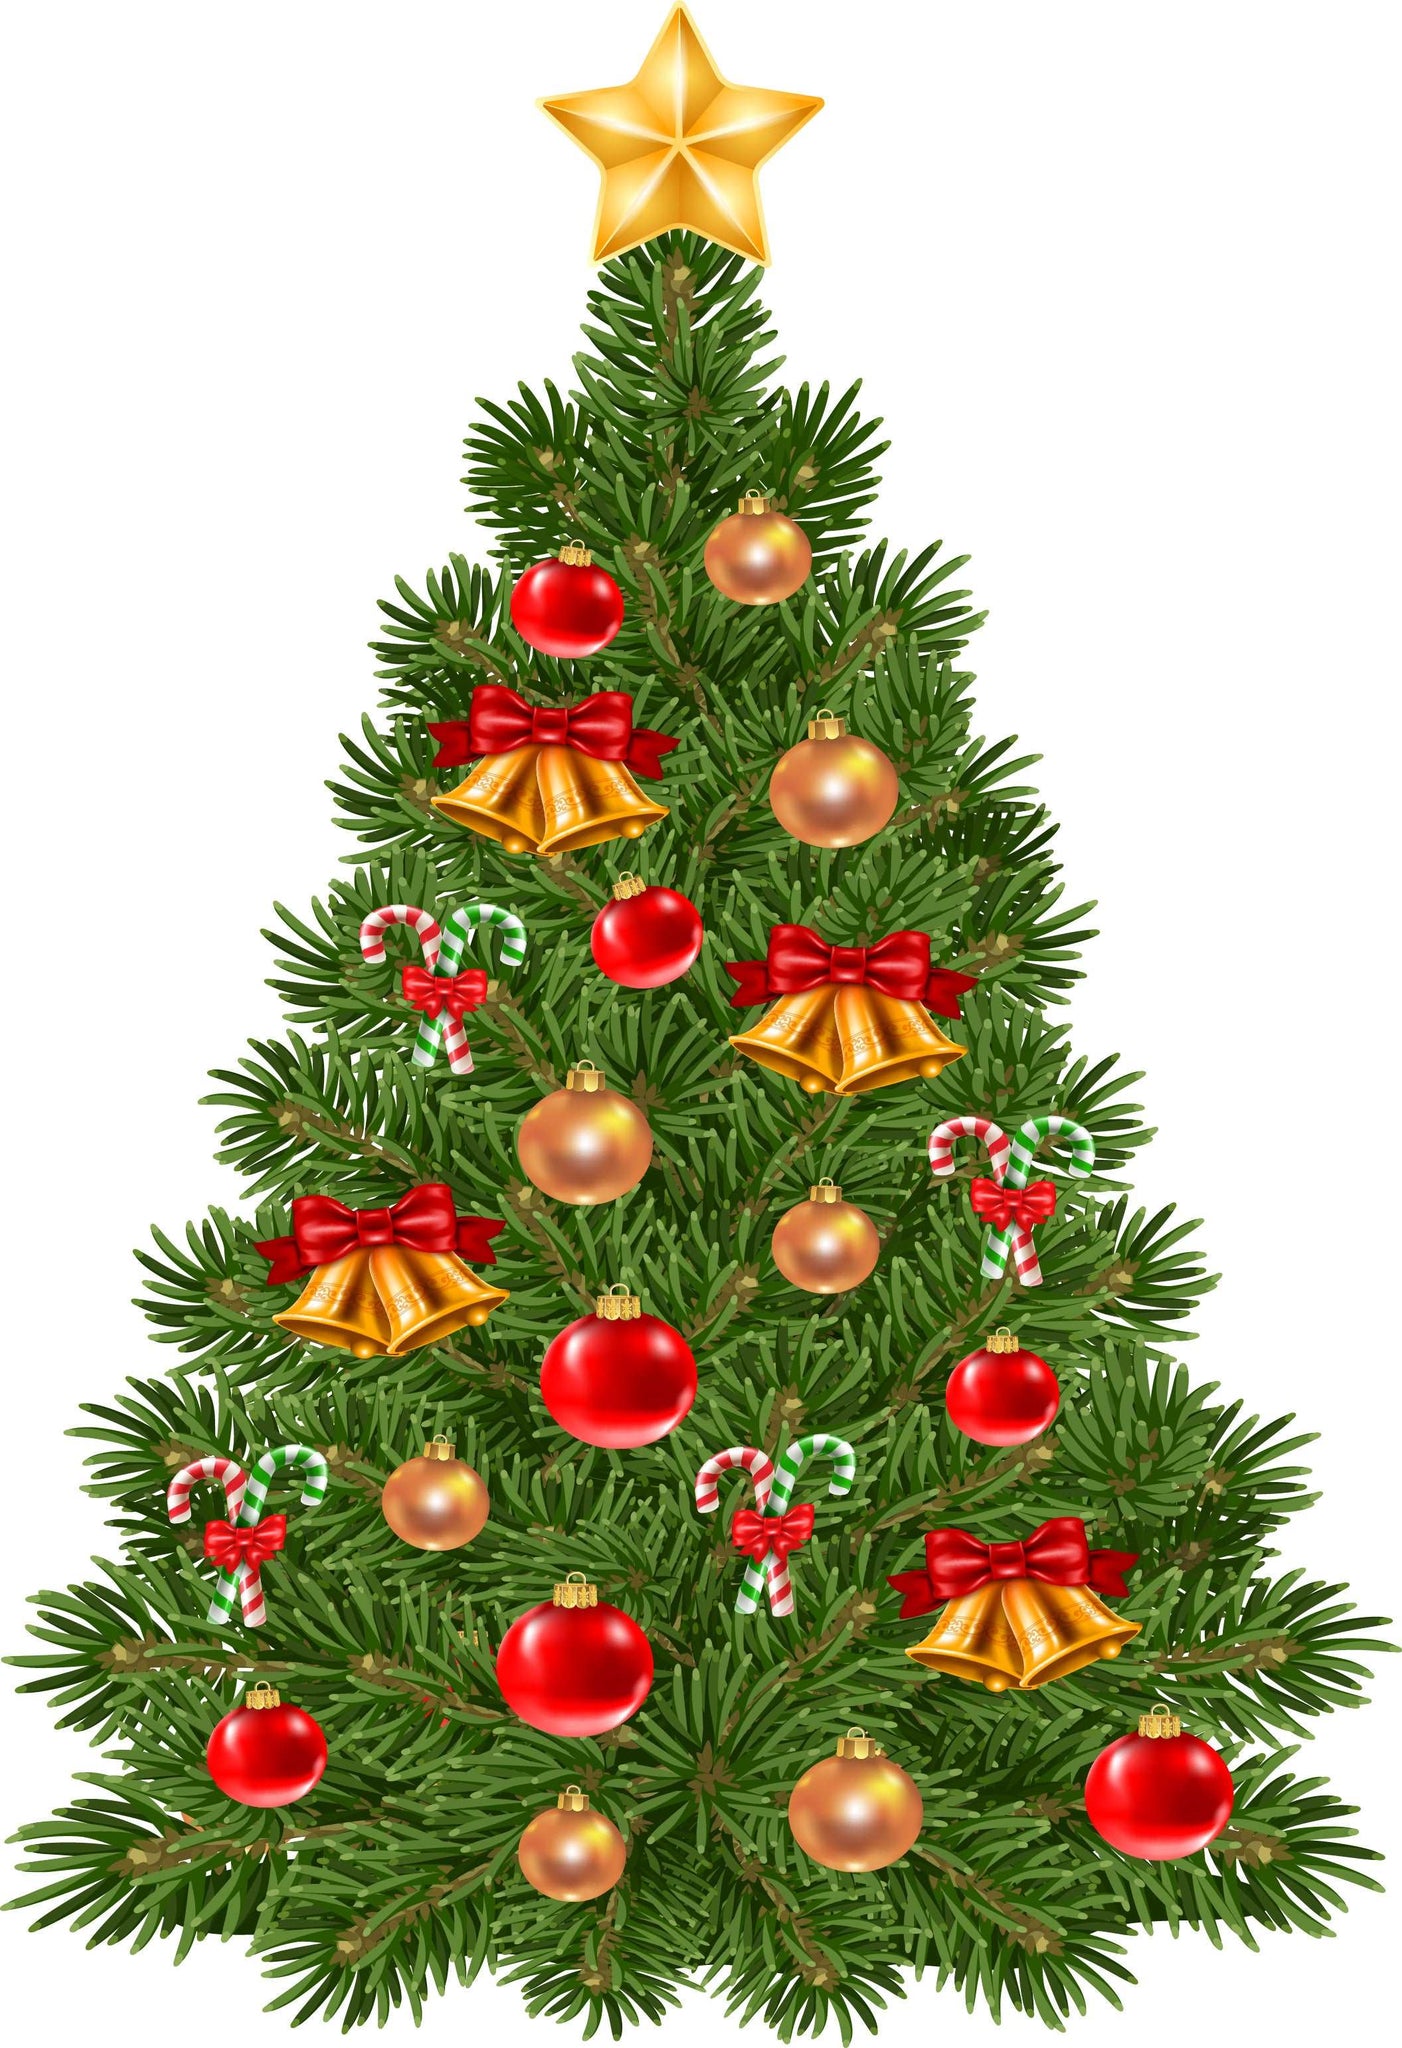 Cute Christmas Tree Stickers for Windows, the Wall, and more